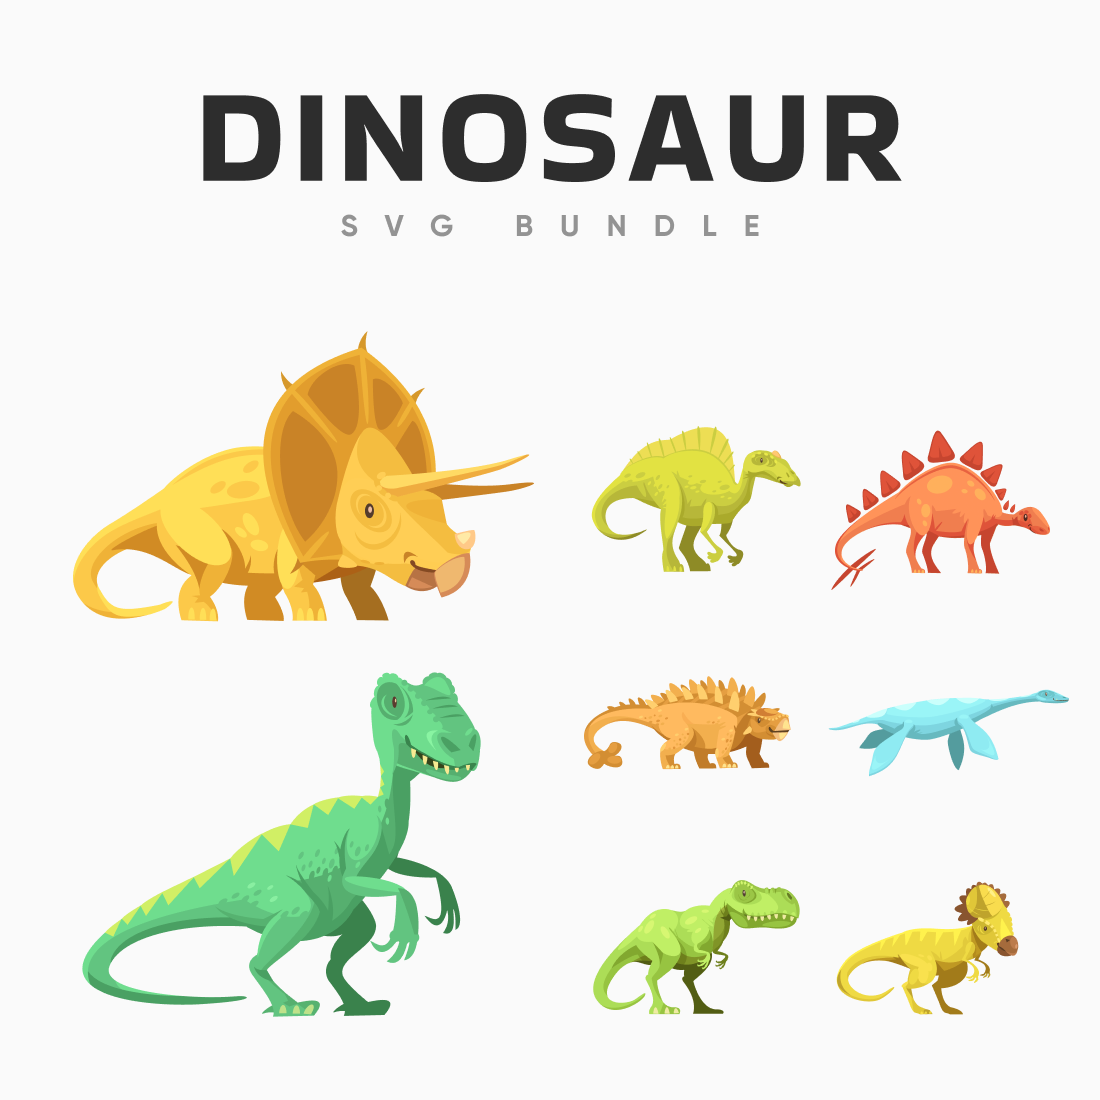 Bunch of different types of dinosaurs on a white background.